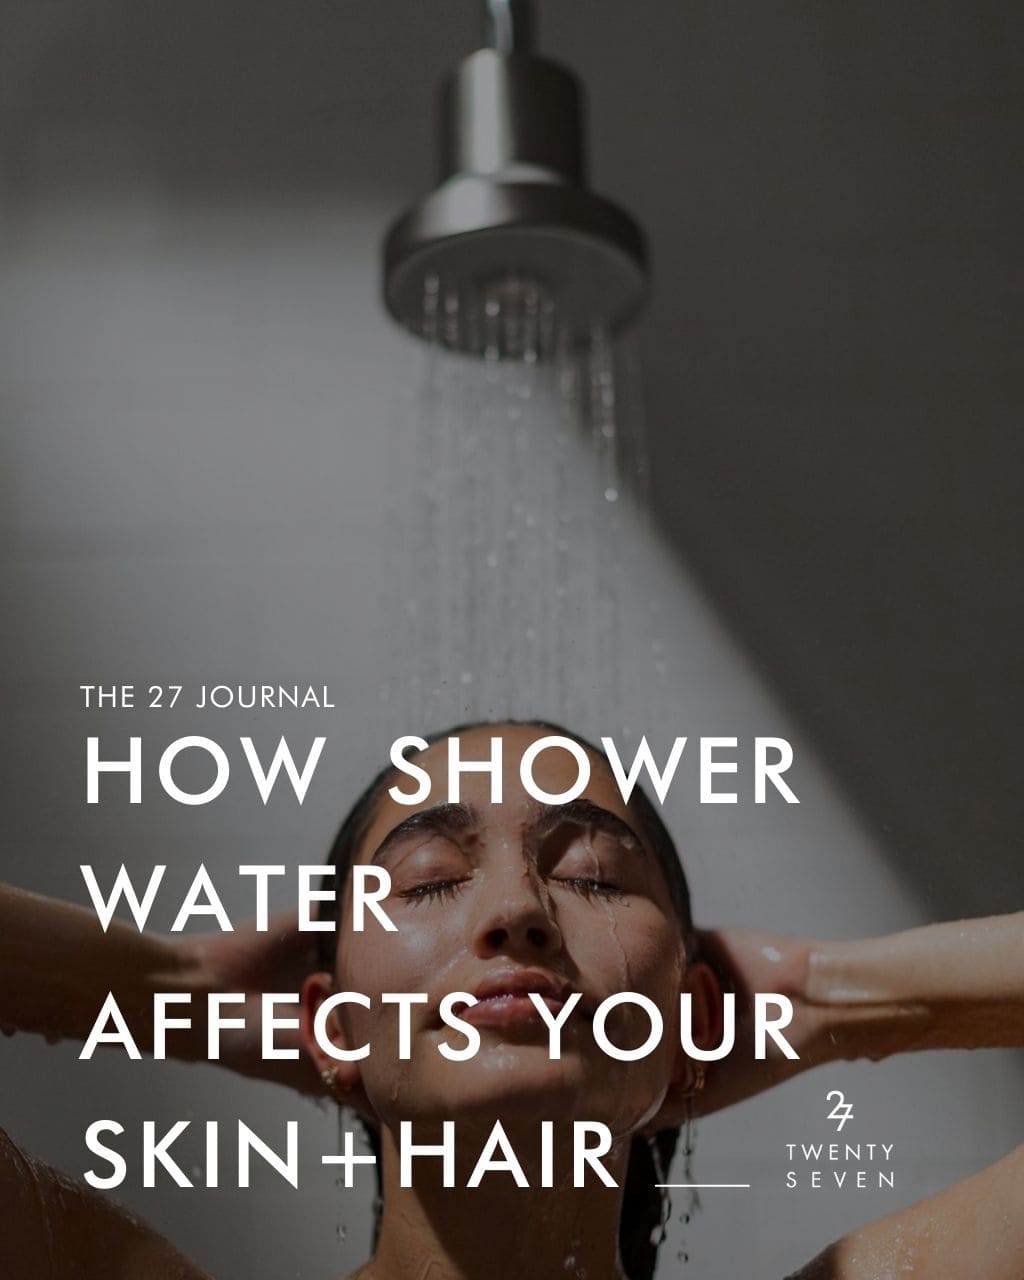 Twentyseven Toronto The 27 Journal | How Shower Water Affects Your Skin and Hair